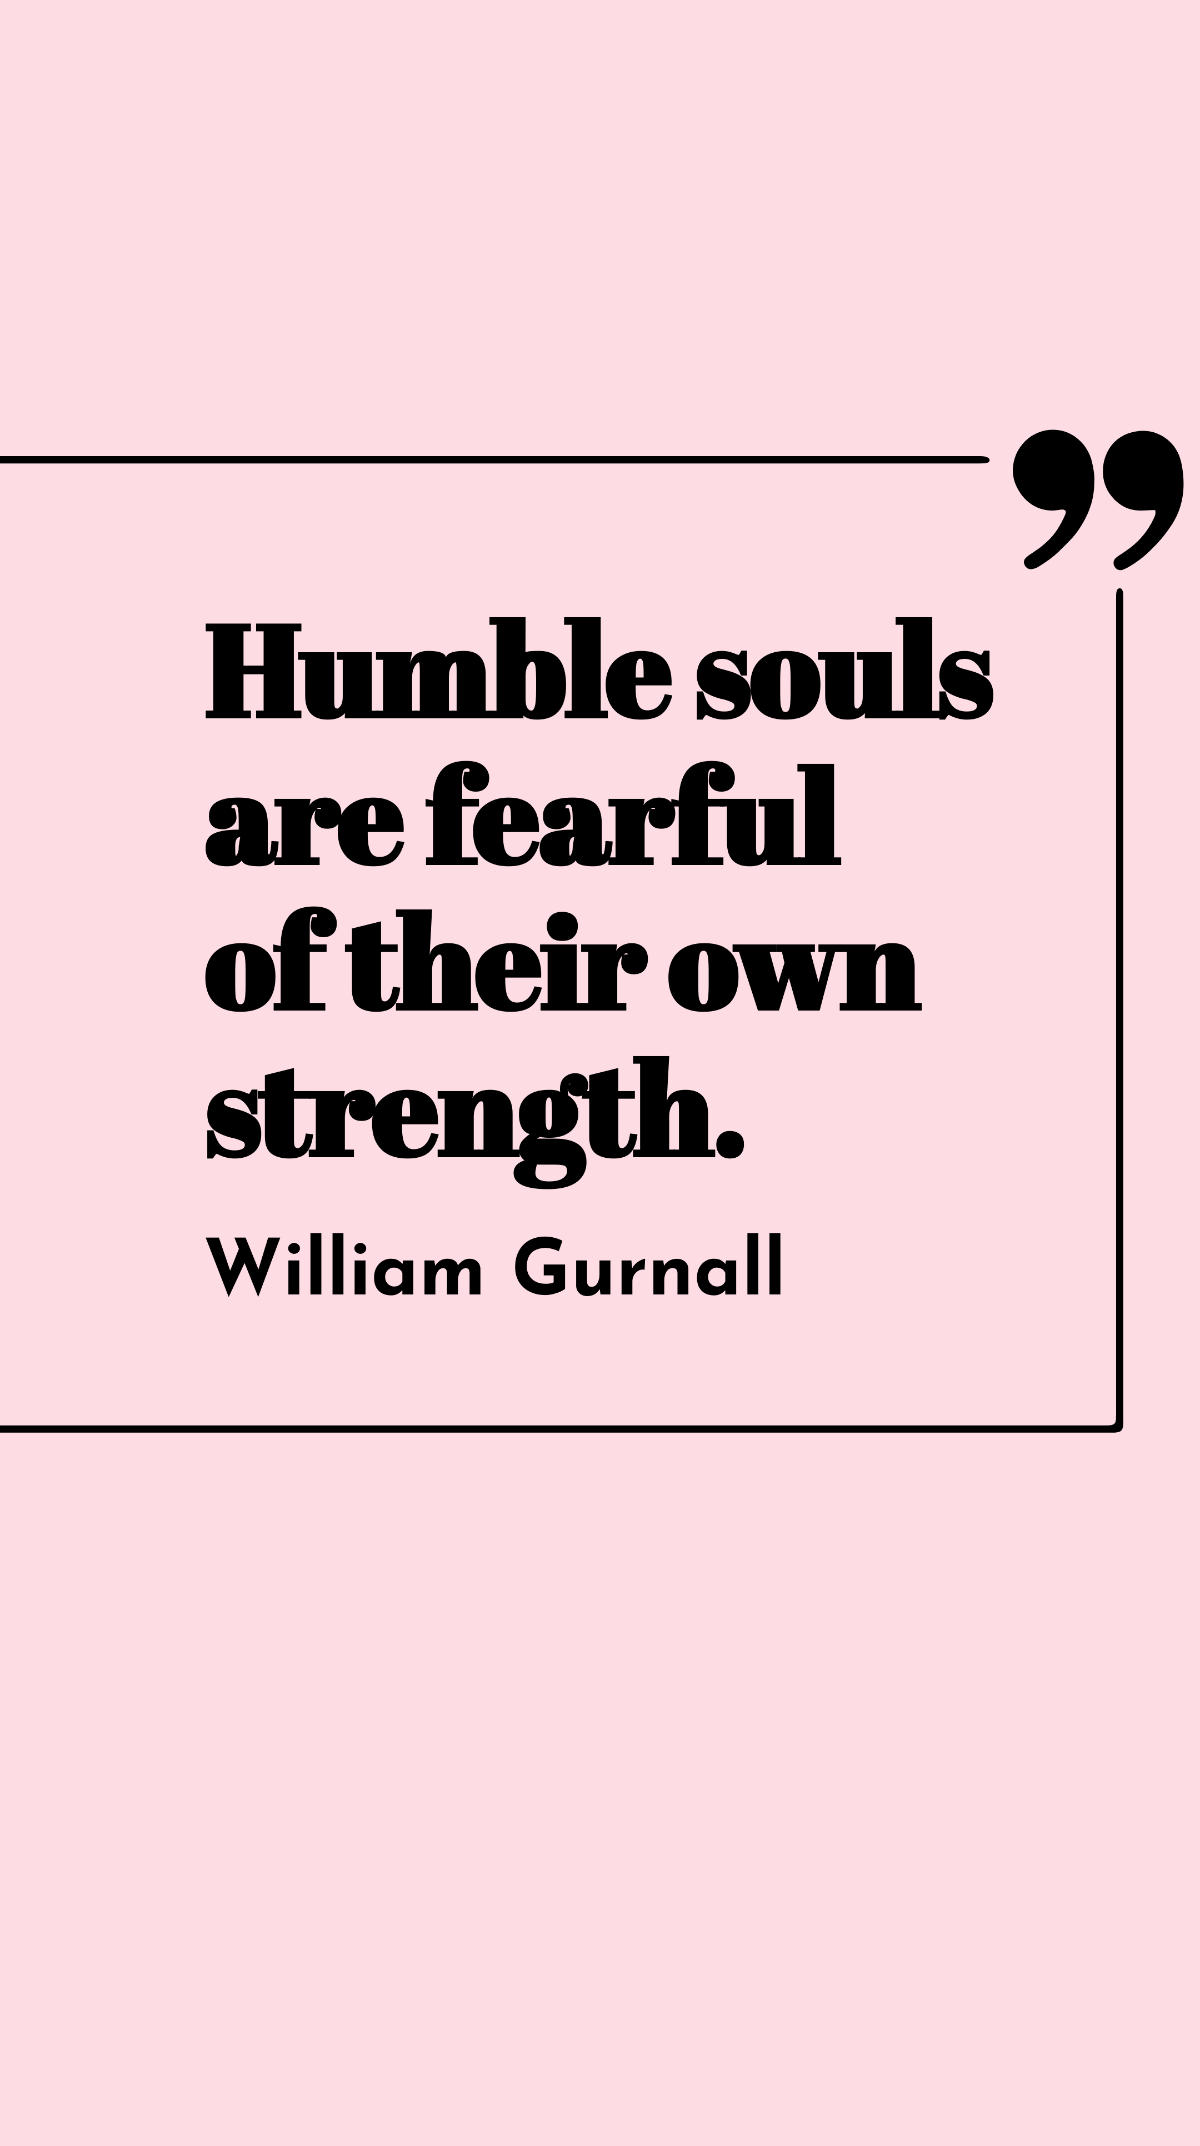 William Gurnall - Humble souls are fearful of their own strength. Template